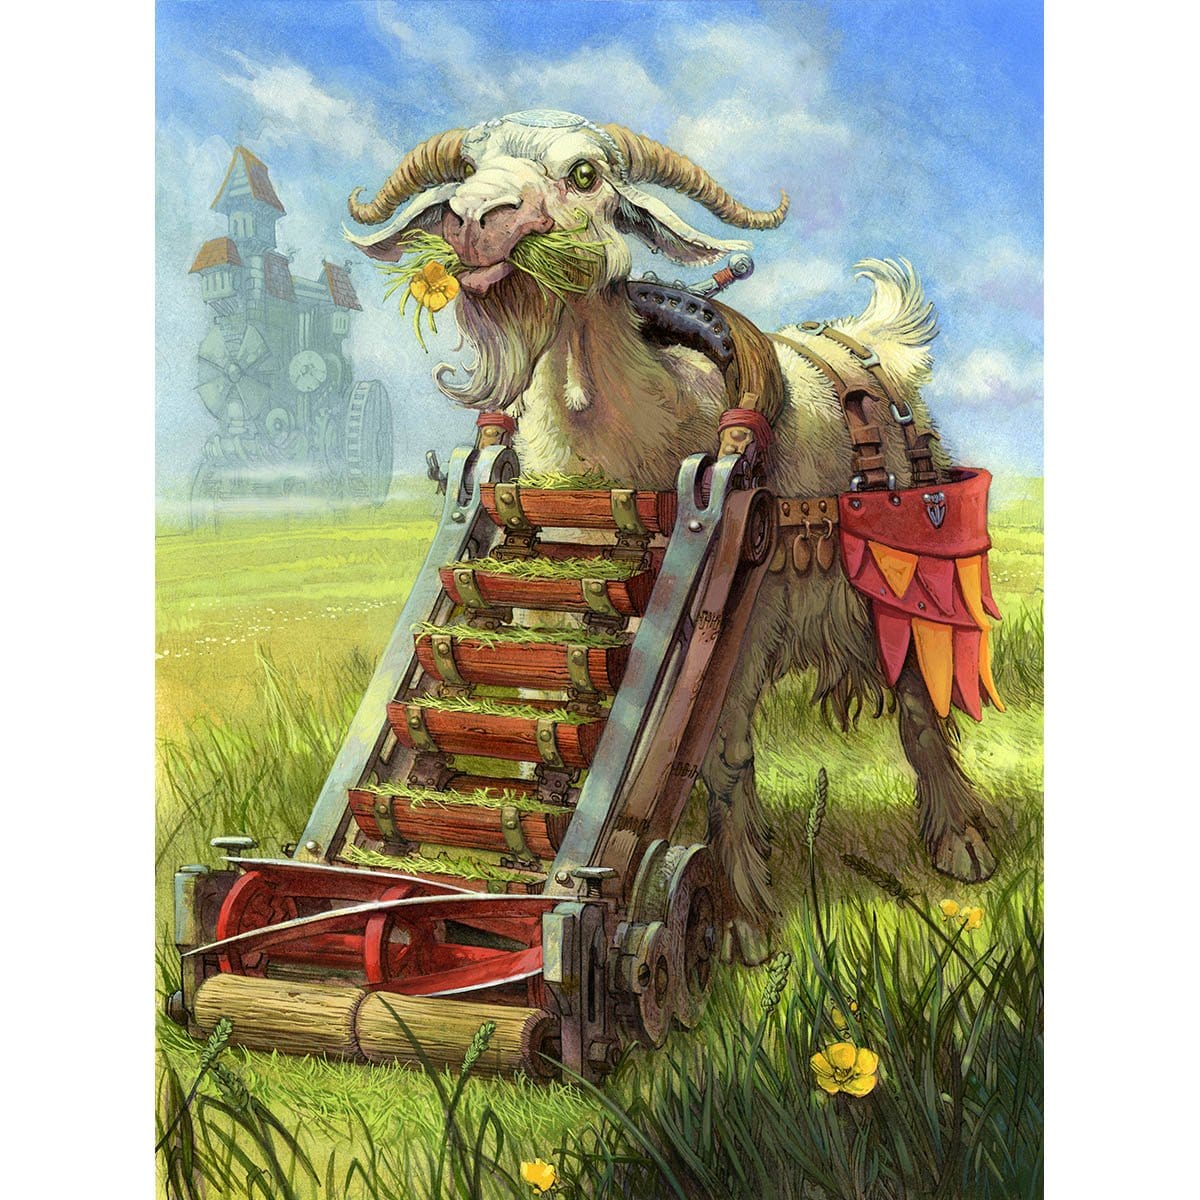 Goat Token Print - Print - Original Magic Art - Accessories for Magic the Gathering and other card games